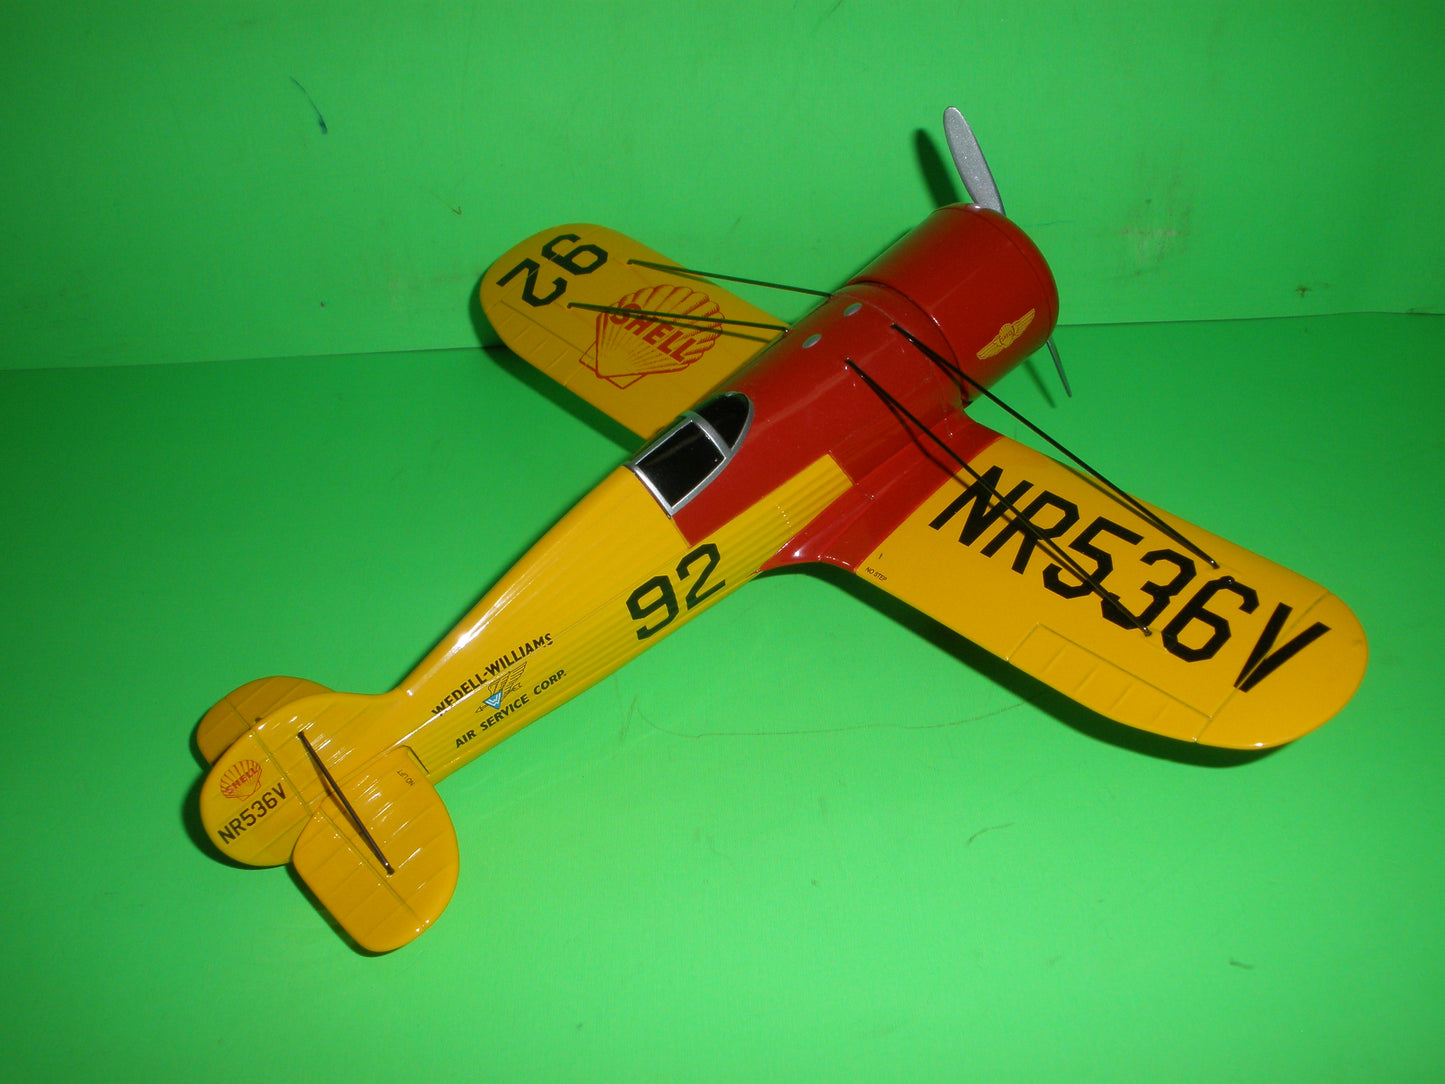 Shell Wedell Williams Racer Airplane